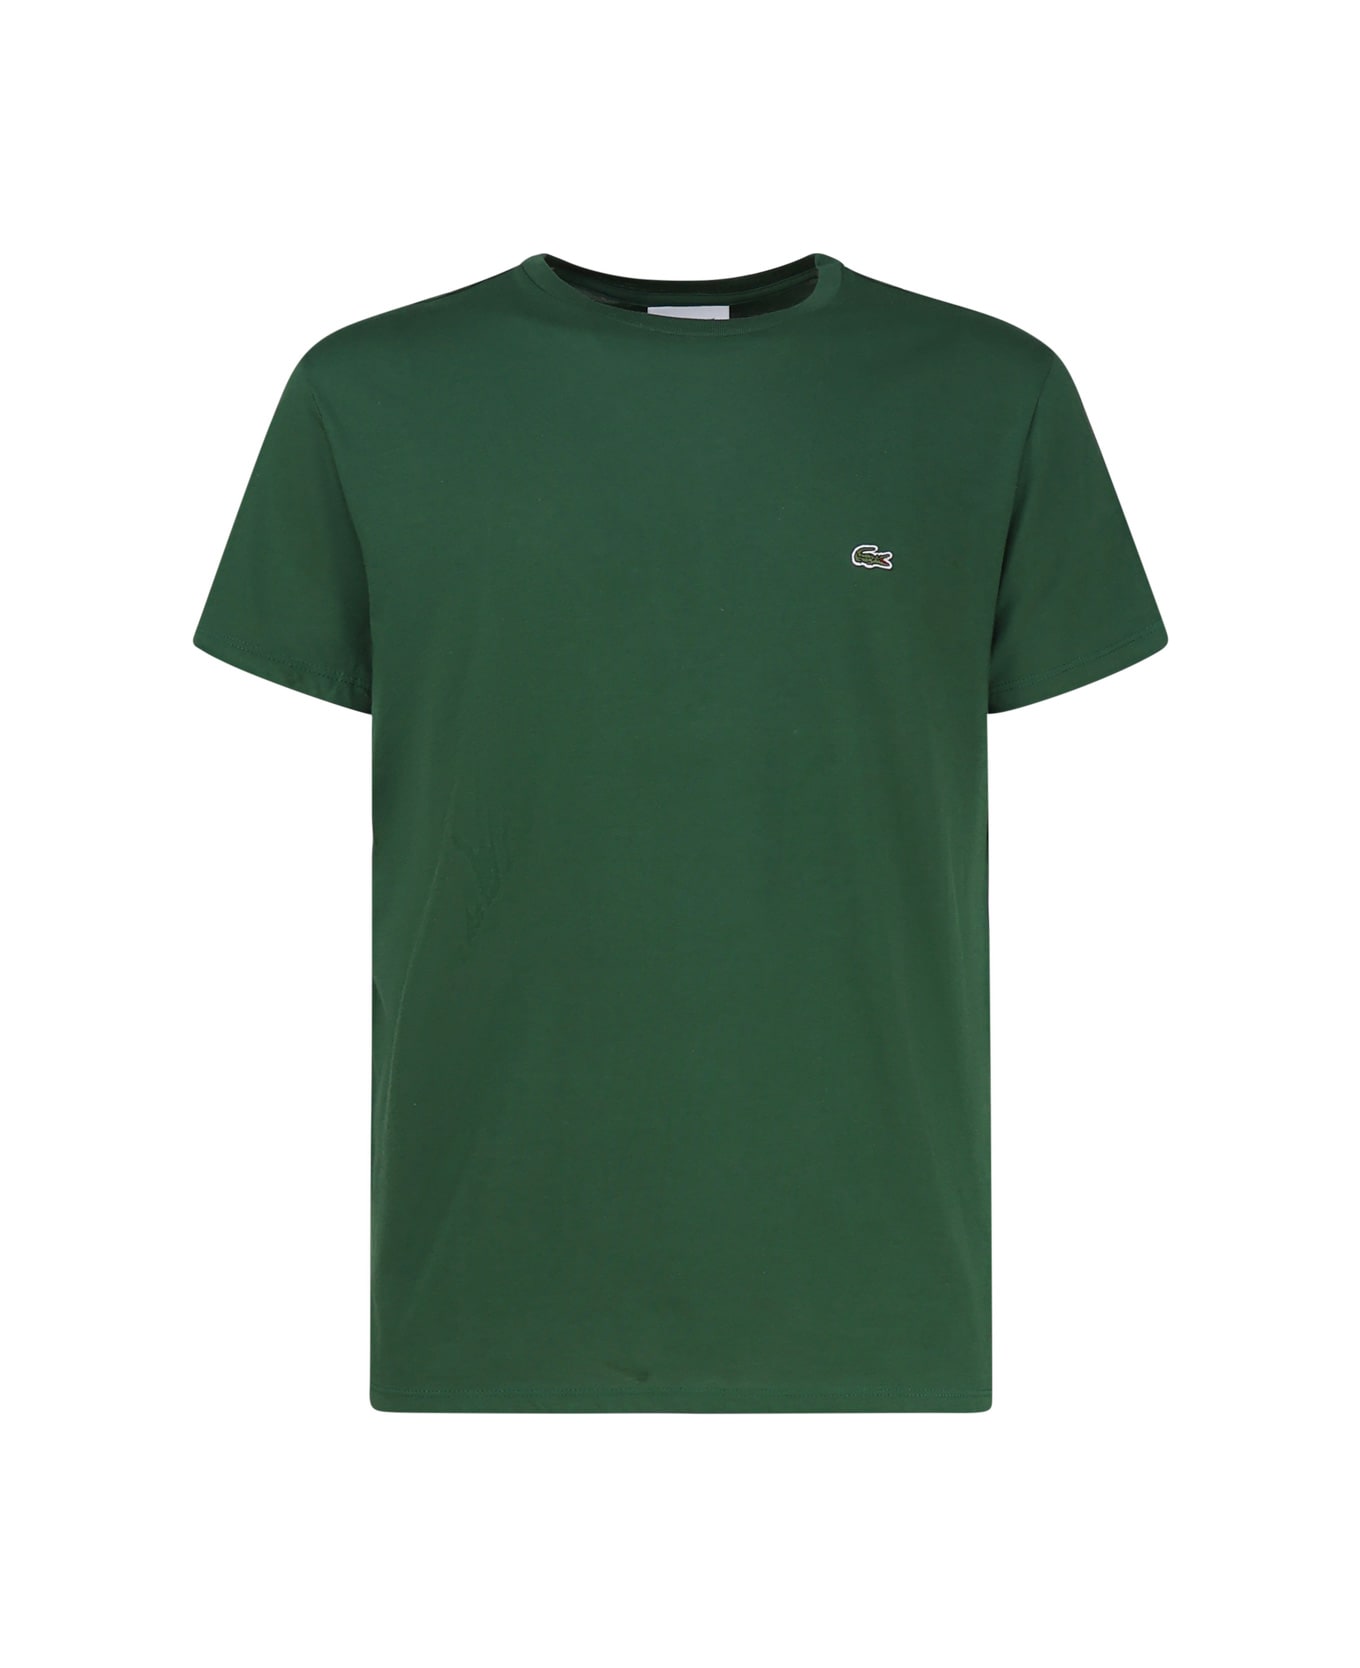 Lacoste Green T-shirt In Cotton Jersey - Green シャツ